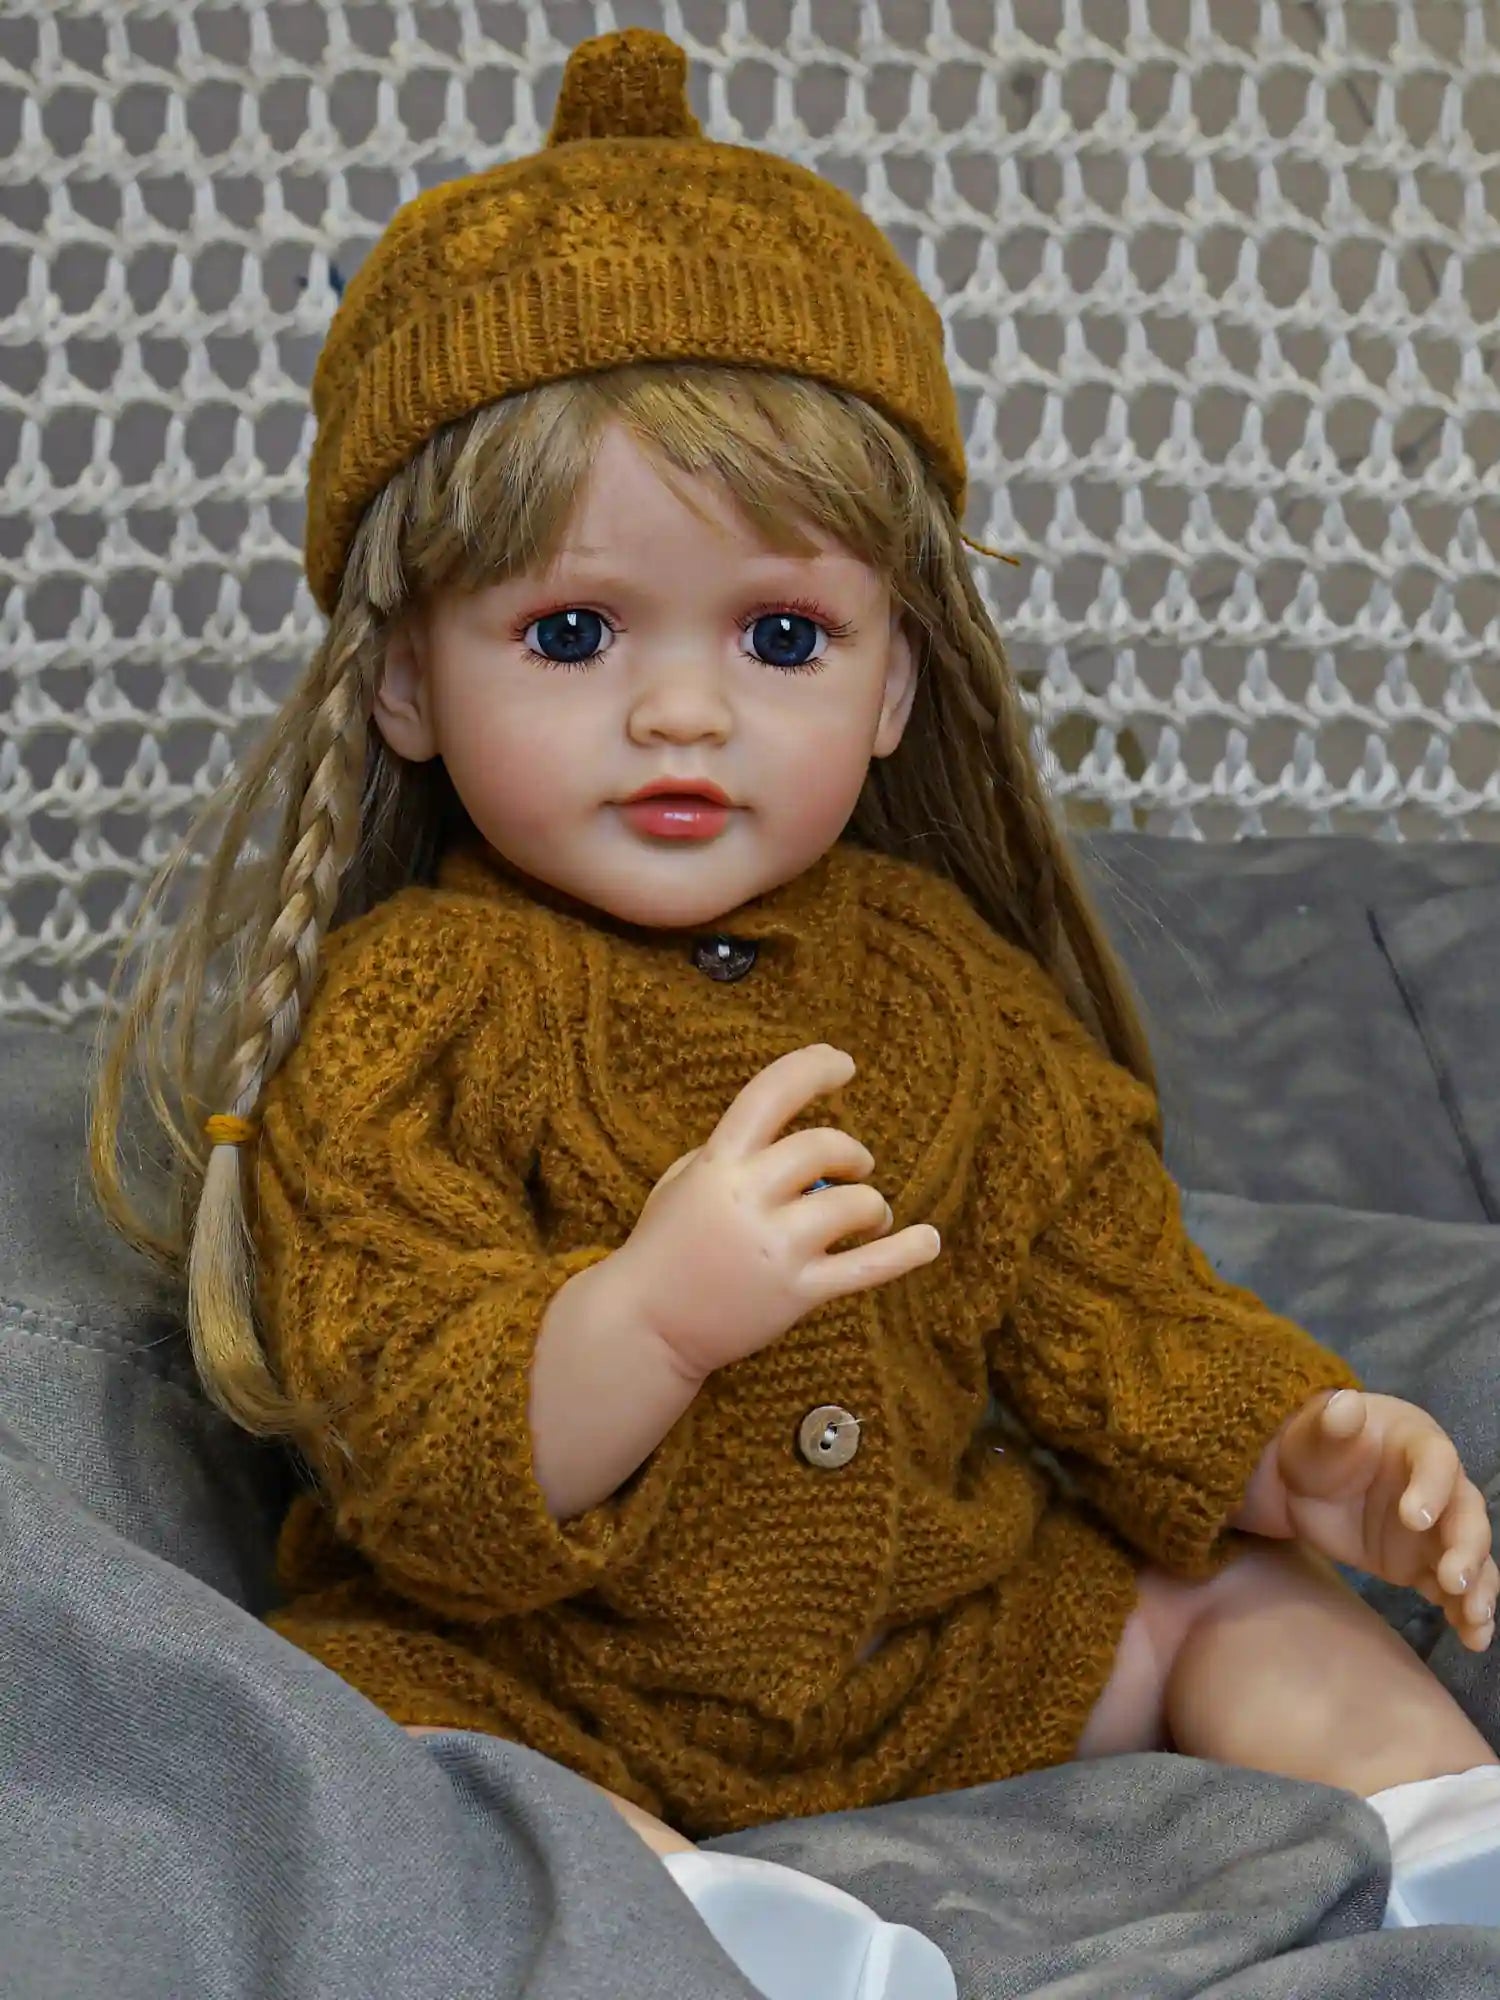 Our lovingly crafted reborn doll, with her warm blonde hair and dressed in a charming green frock, is a symbol of joy and serenity.